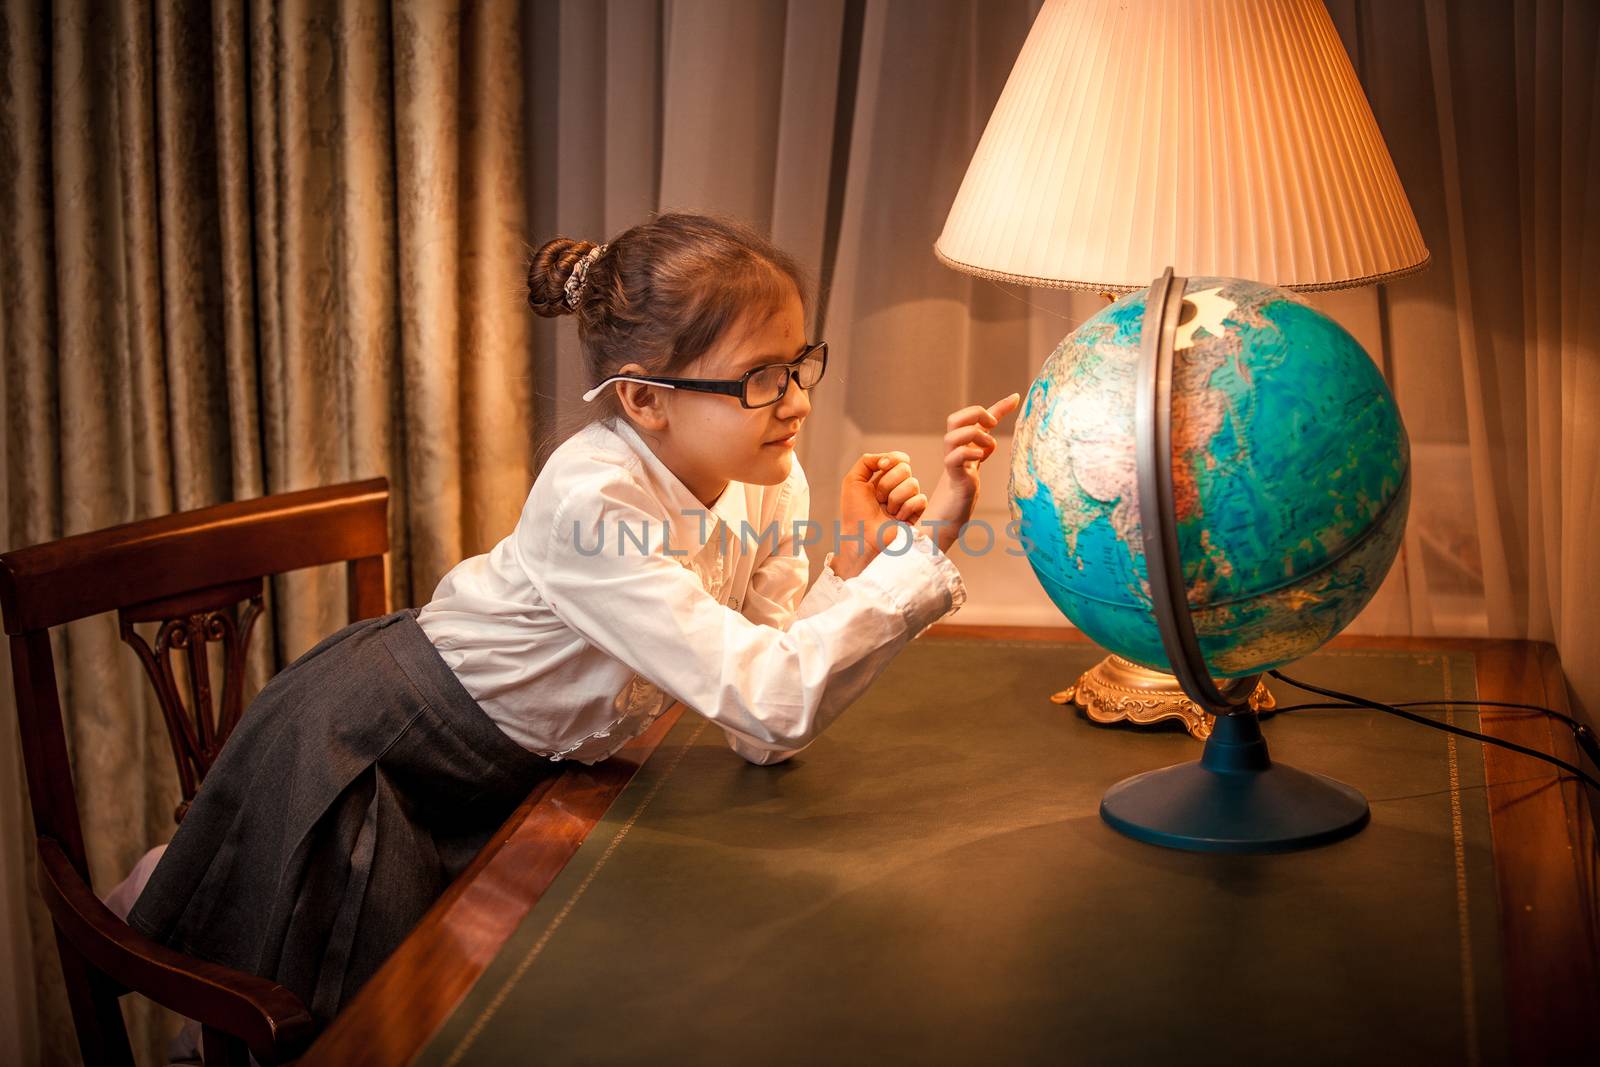 Little girl looking patiently at globe in classic interior